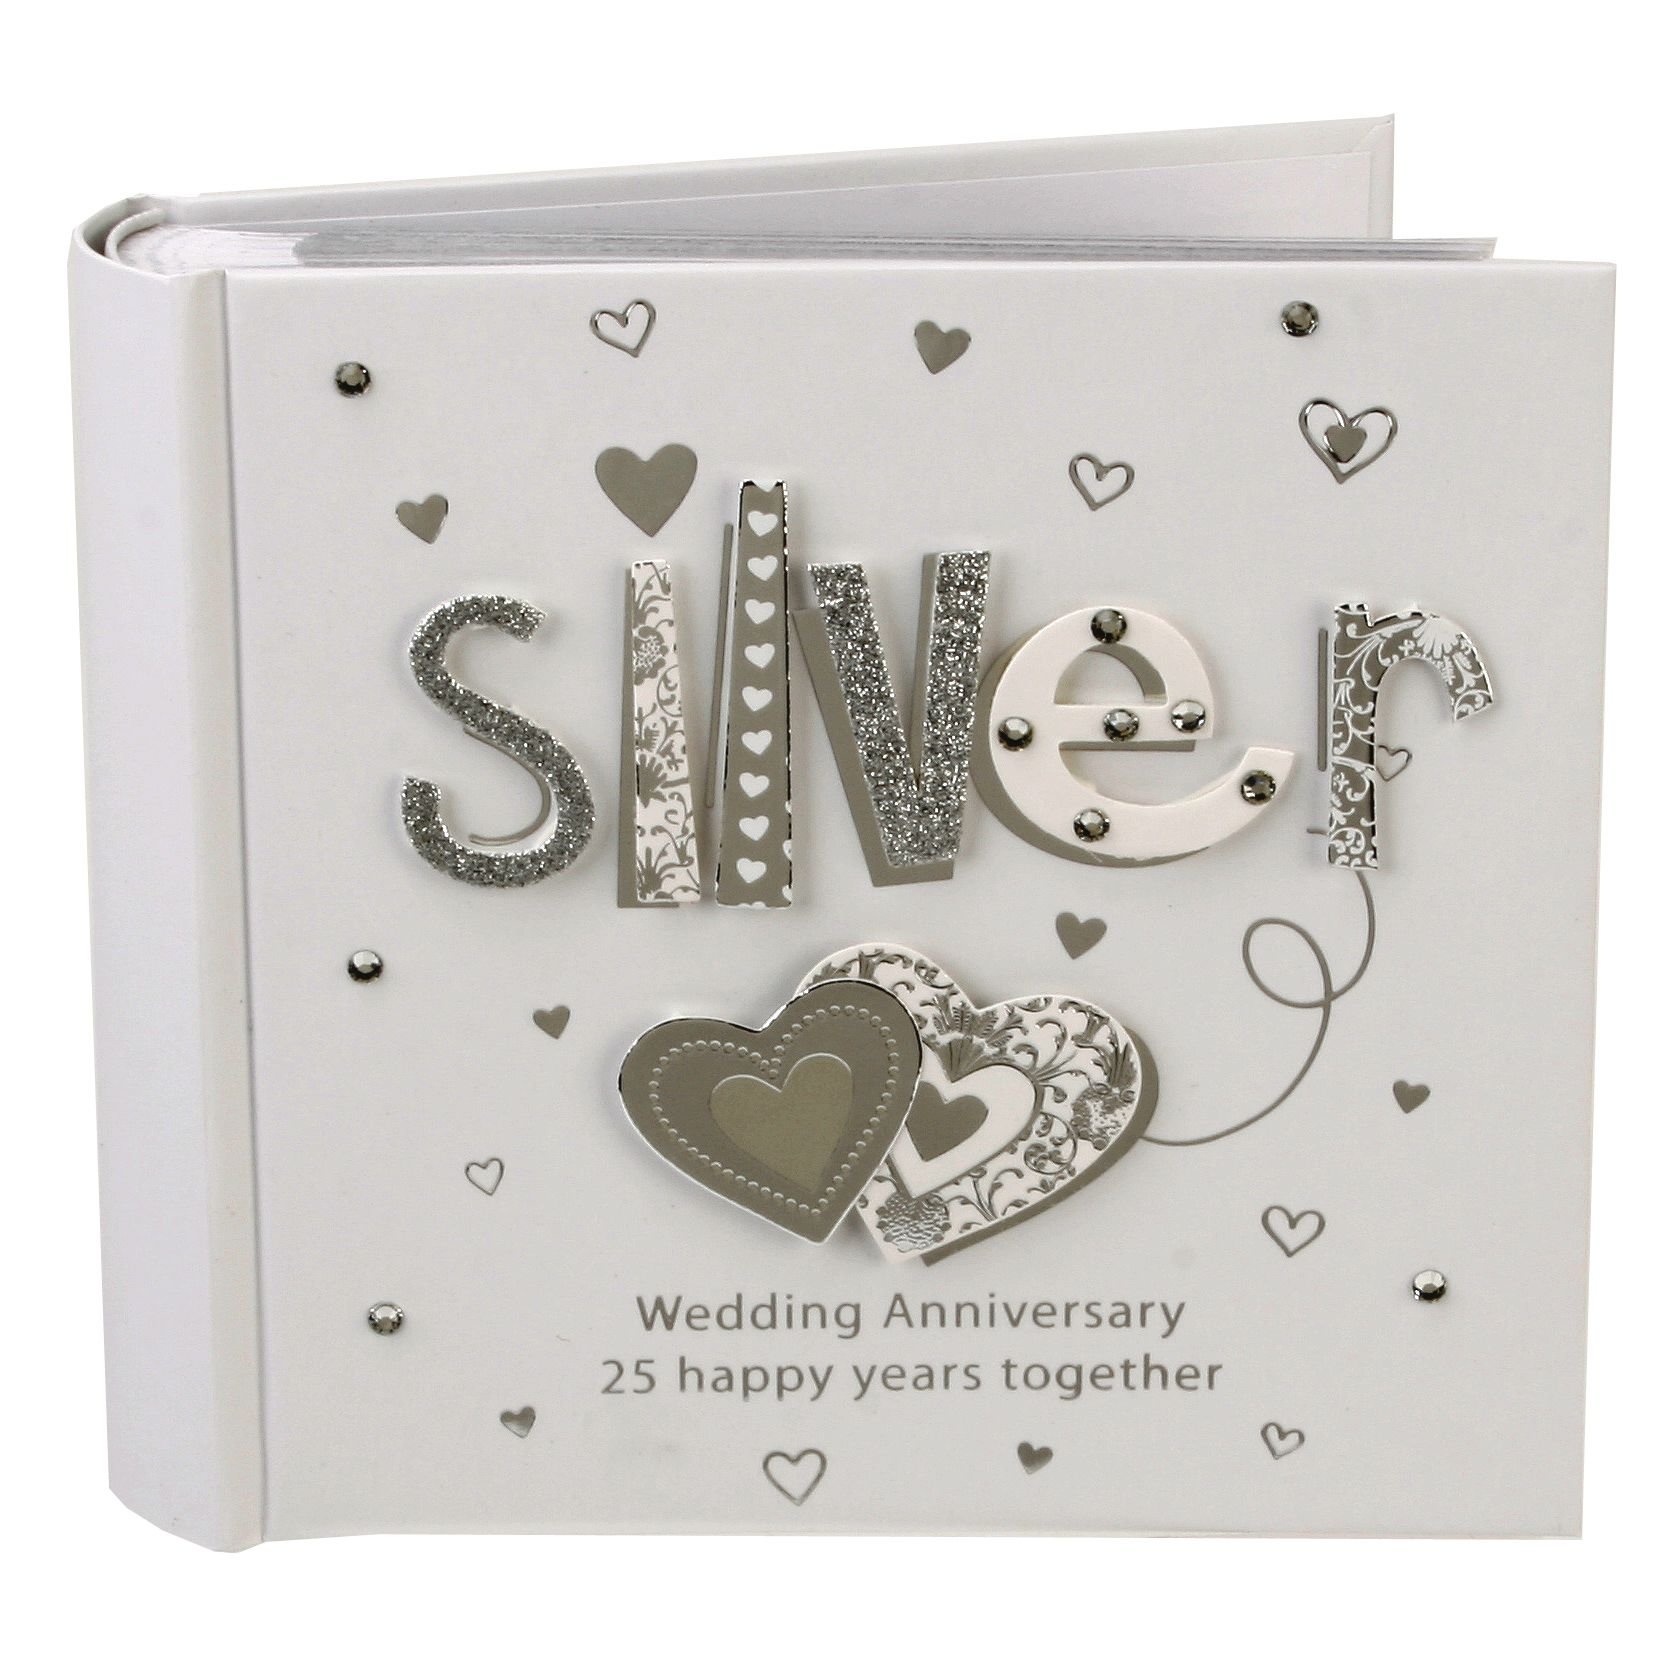 10 Nice 25Th Anniversary Gift Ideas For Husband wedding anniversary gifts 25th wedding anniversary gifts for parents uk 2 2022